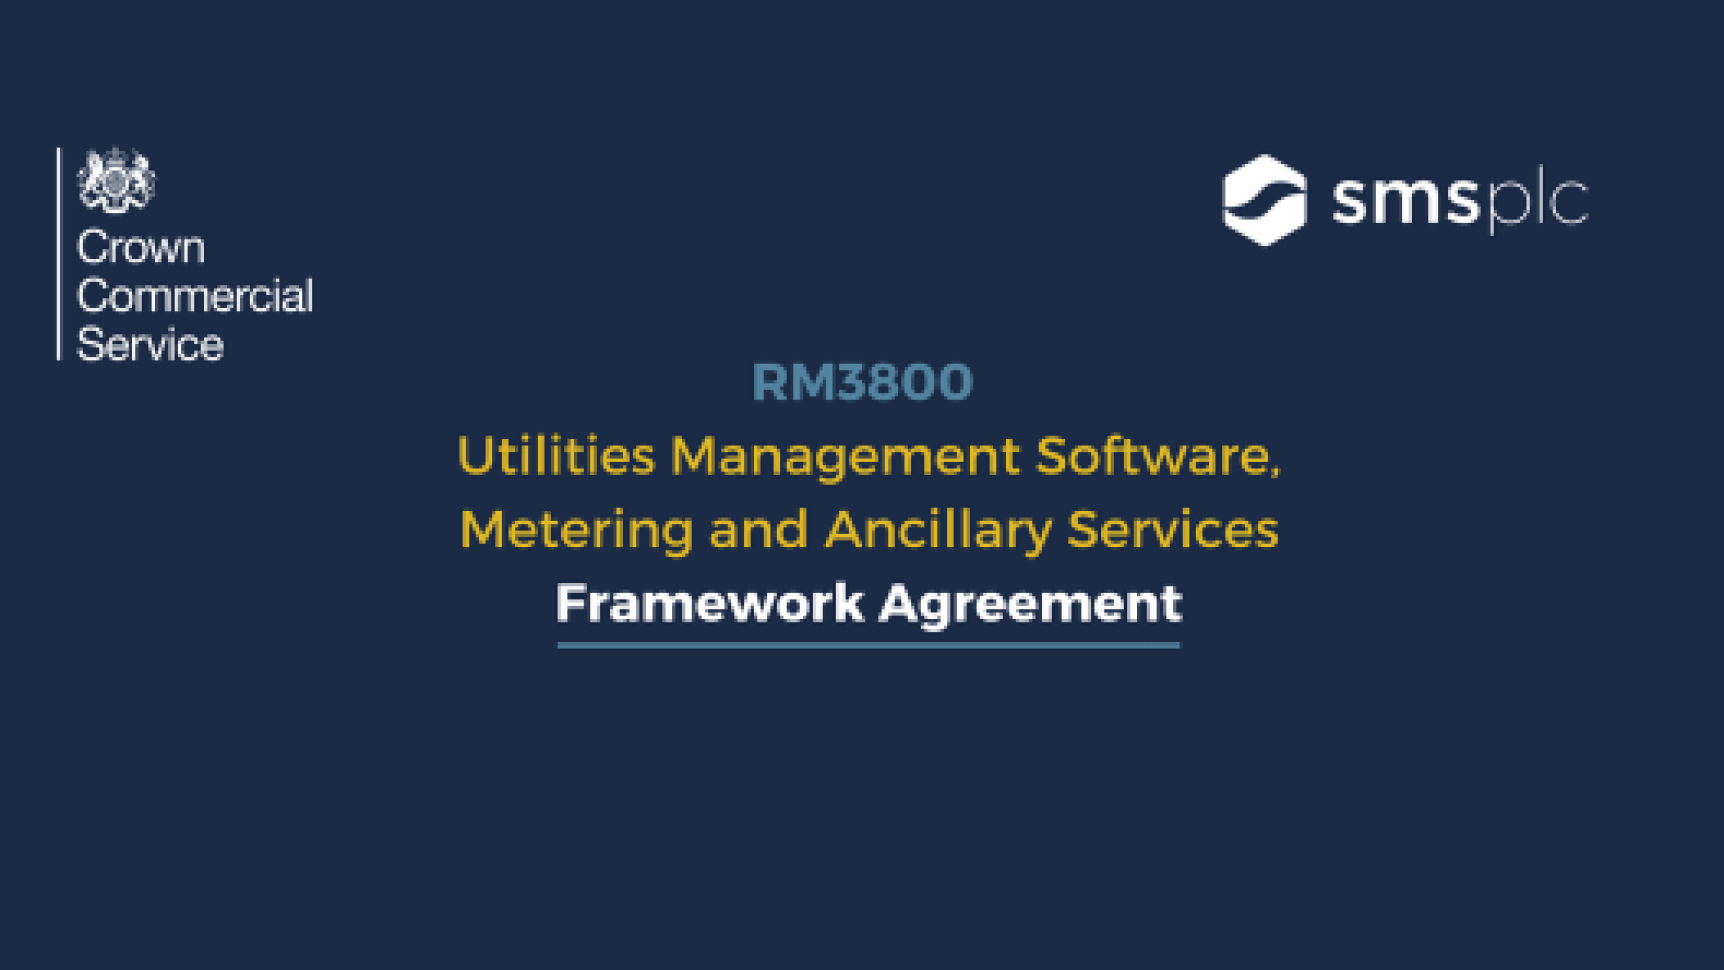 RM3800 Utilities Management Software, Metering and Ancillary Services Framework Agreement